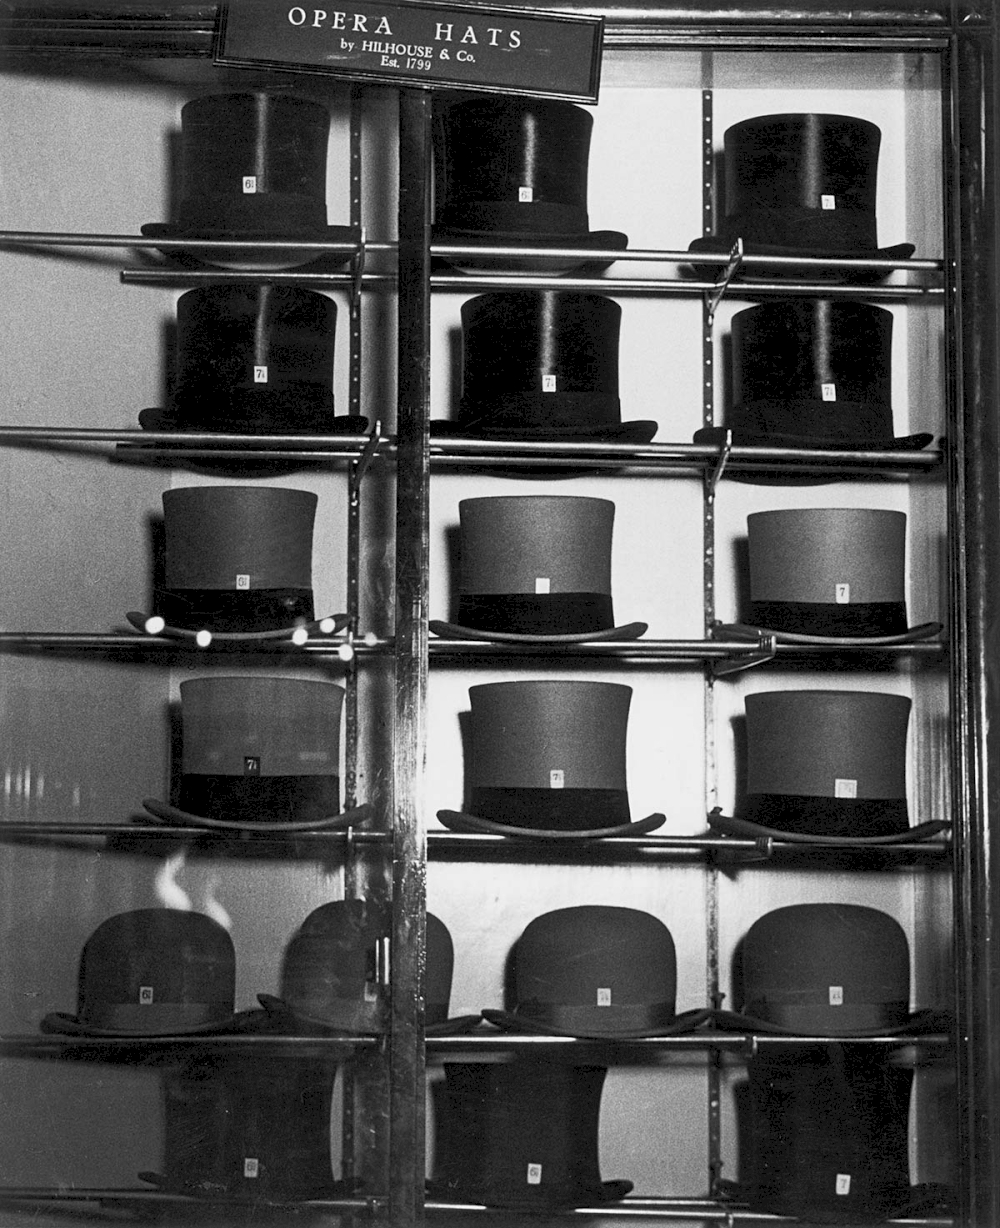 Bond Street hatter’s show-case, 1934  - Private collection, Courtesy Bill Brandt Archive and Edwynn Houk Gallery © Bill Brandt / Bill Brandt Archive Ltd.